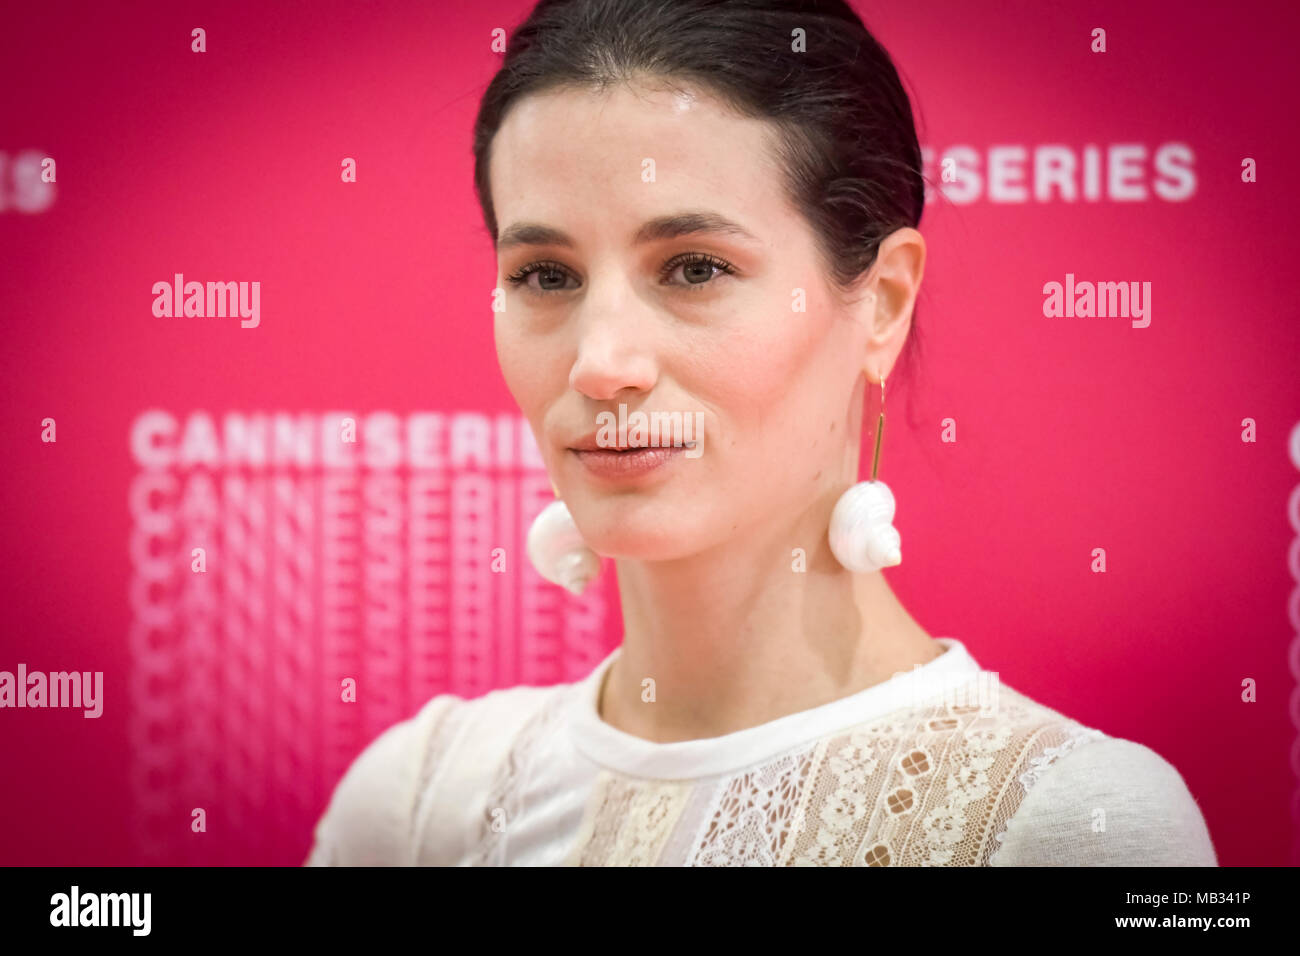 Opening Ceremony of the 1st Cannes Film Festival Canneseries - Elisa Lasowski Stock Photo